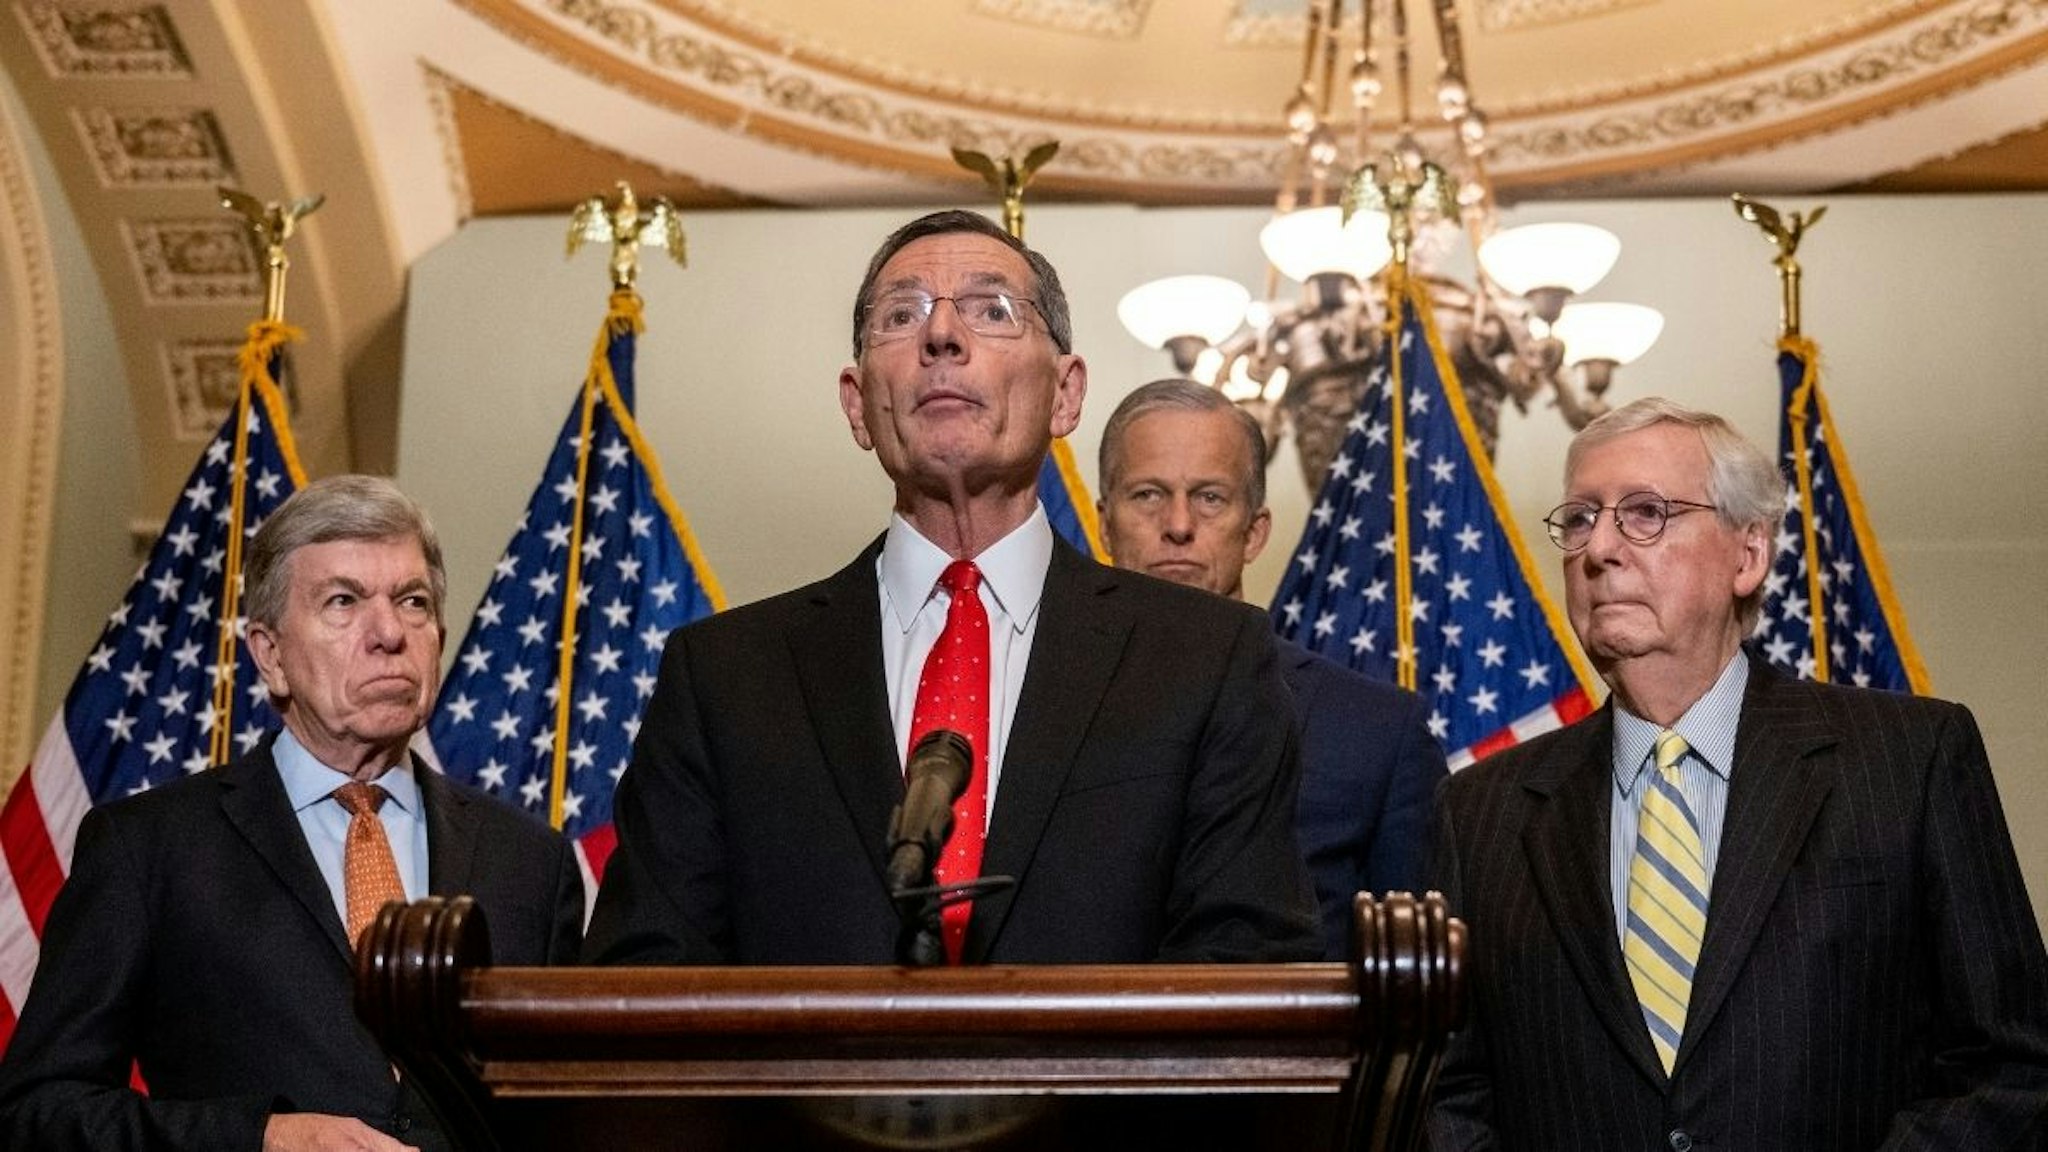 Sen. John Barrasso (R-WYO) speaks at a news conference after the Senate luncheons in the U.S. Capitol on June 22, 2022 in Washington, DC.